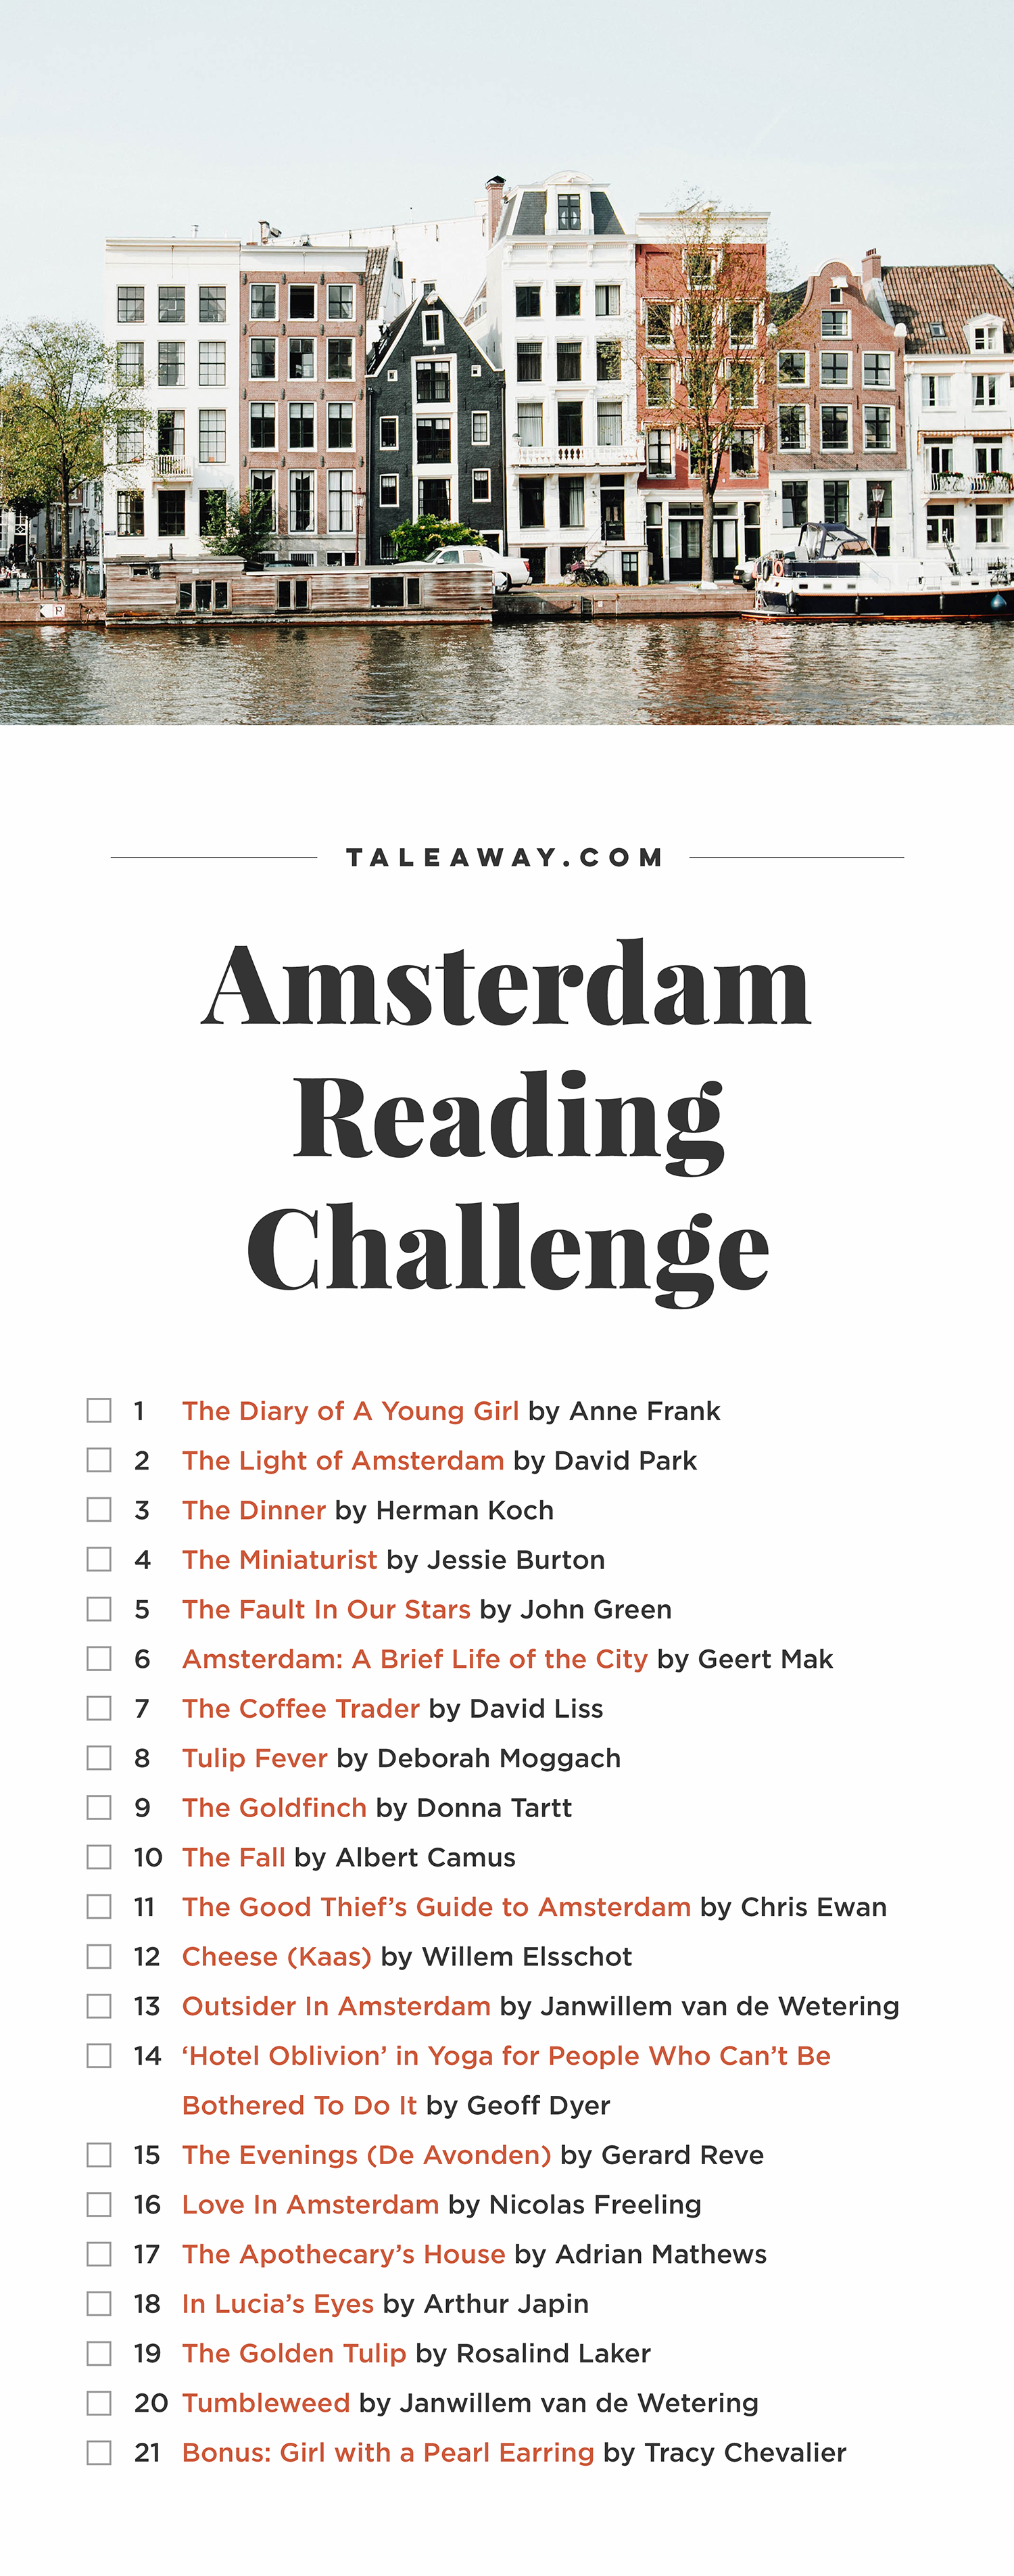 Amsterdam Reading Challenge, Books Set In Amsterdam - For more books visit www.taleway.com to find books set around the world. Ideas for those who like to travel, both in life and in fiction. reading challenge, amsterdam reading challenge, book challenge, books you must read, books from around the world, world books, books and travel, travel reading list, reading list, books around the world, books to read, amsterdam books, amsterdam books novels, amsterdam travel